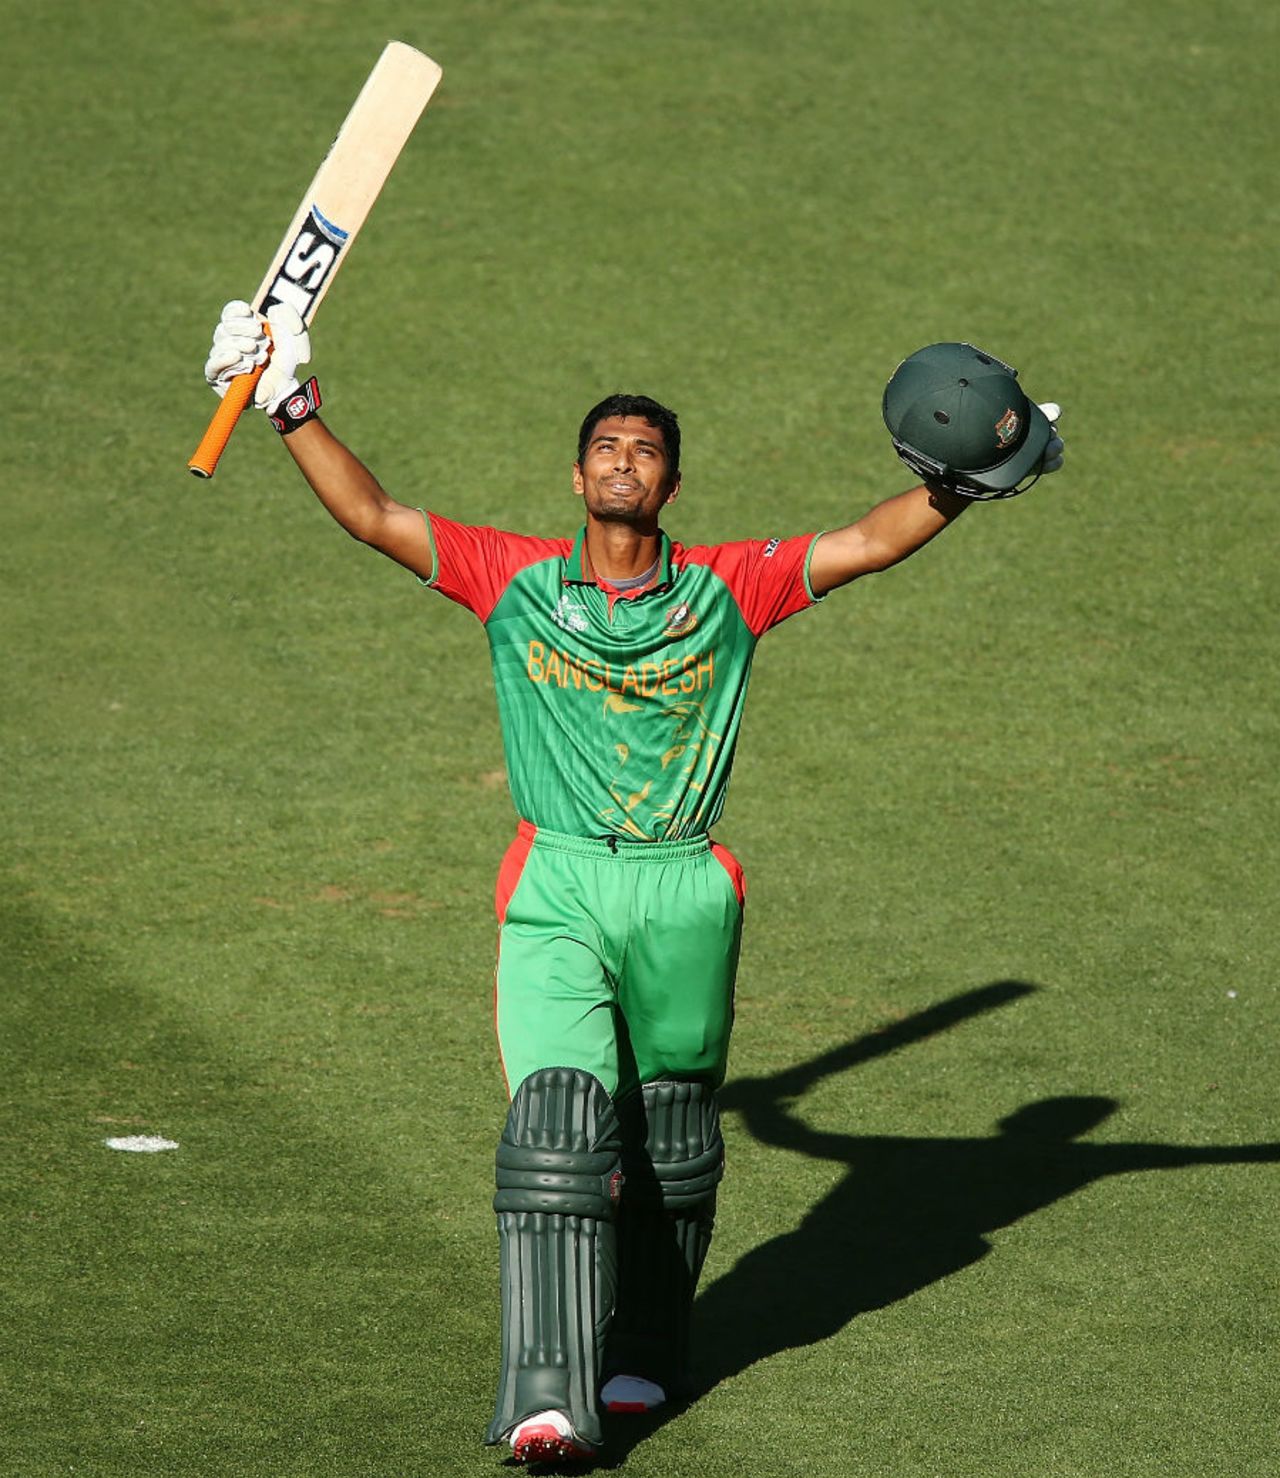 Mahmudullah's maiden ton was also the first by a Bangladesh player in World Cups, England v Bangladesh, World Cup 2015, Group A, Adelaide, March 9, 2015